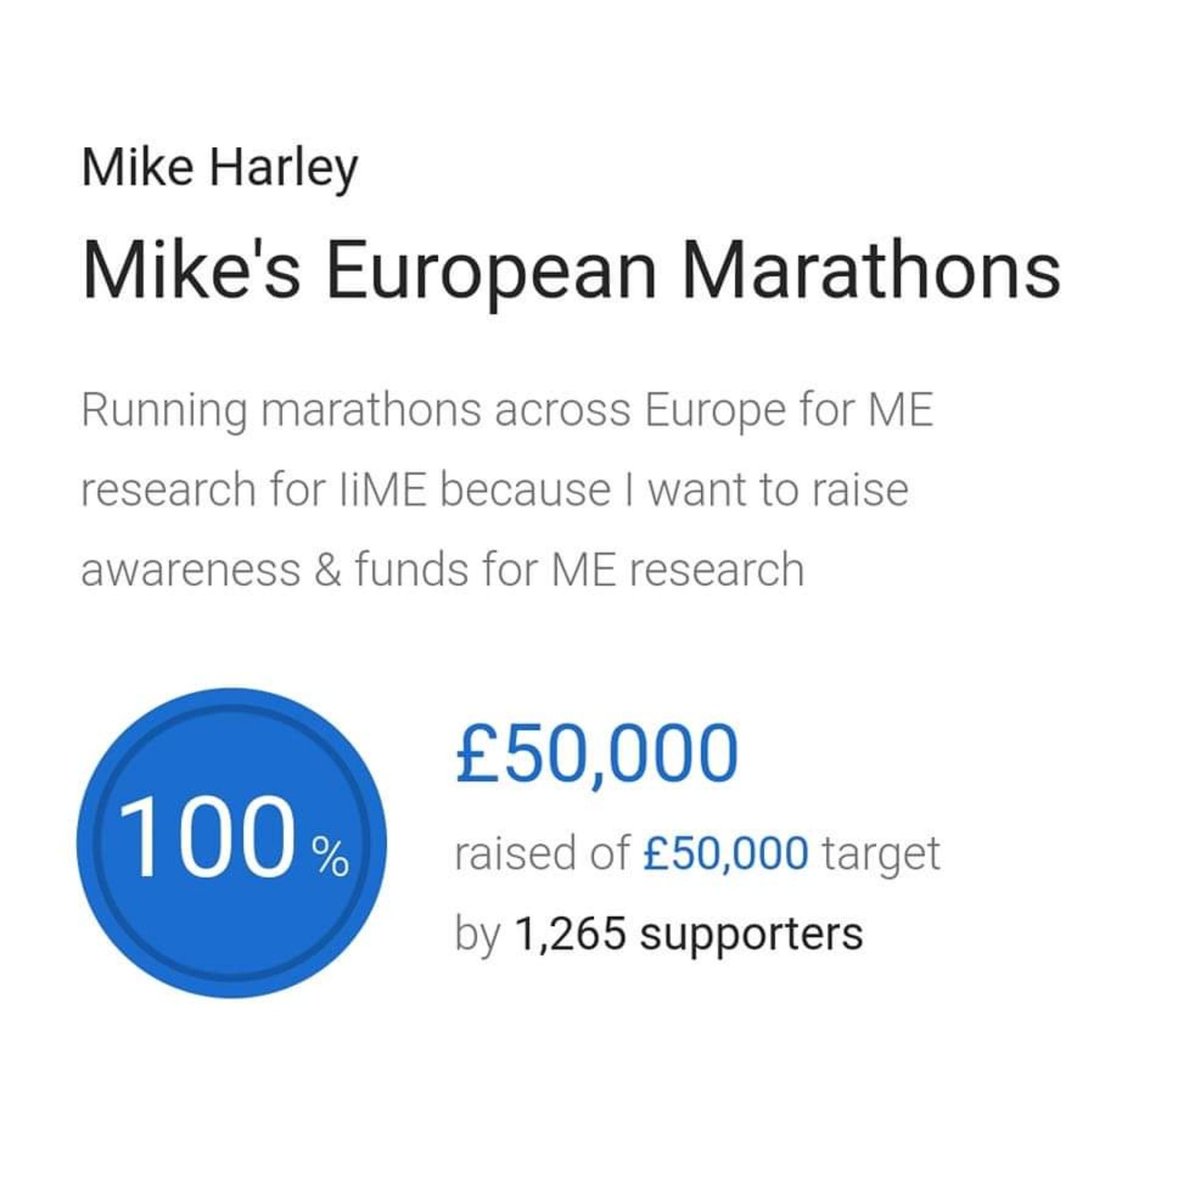 Thanks to @MikesEUmaras for this amazing achievement Enabling biomedical research @CofEforME in @NorwichResearch and raising awareness around #Europe Our great thanks to Mike and his family justgiving.com/fundraising/mi… #mecfs @TheQuadram #research #philanthropy